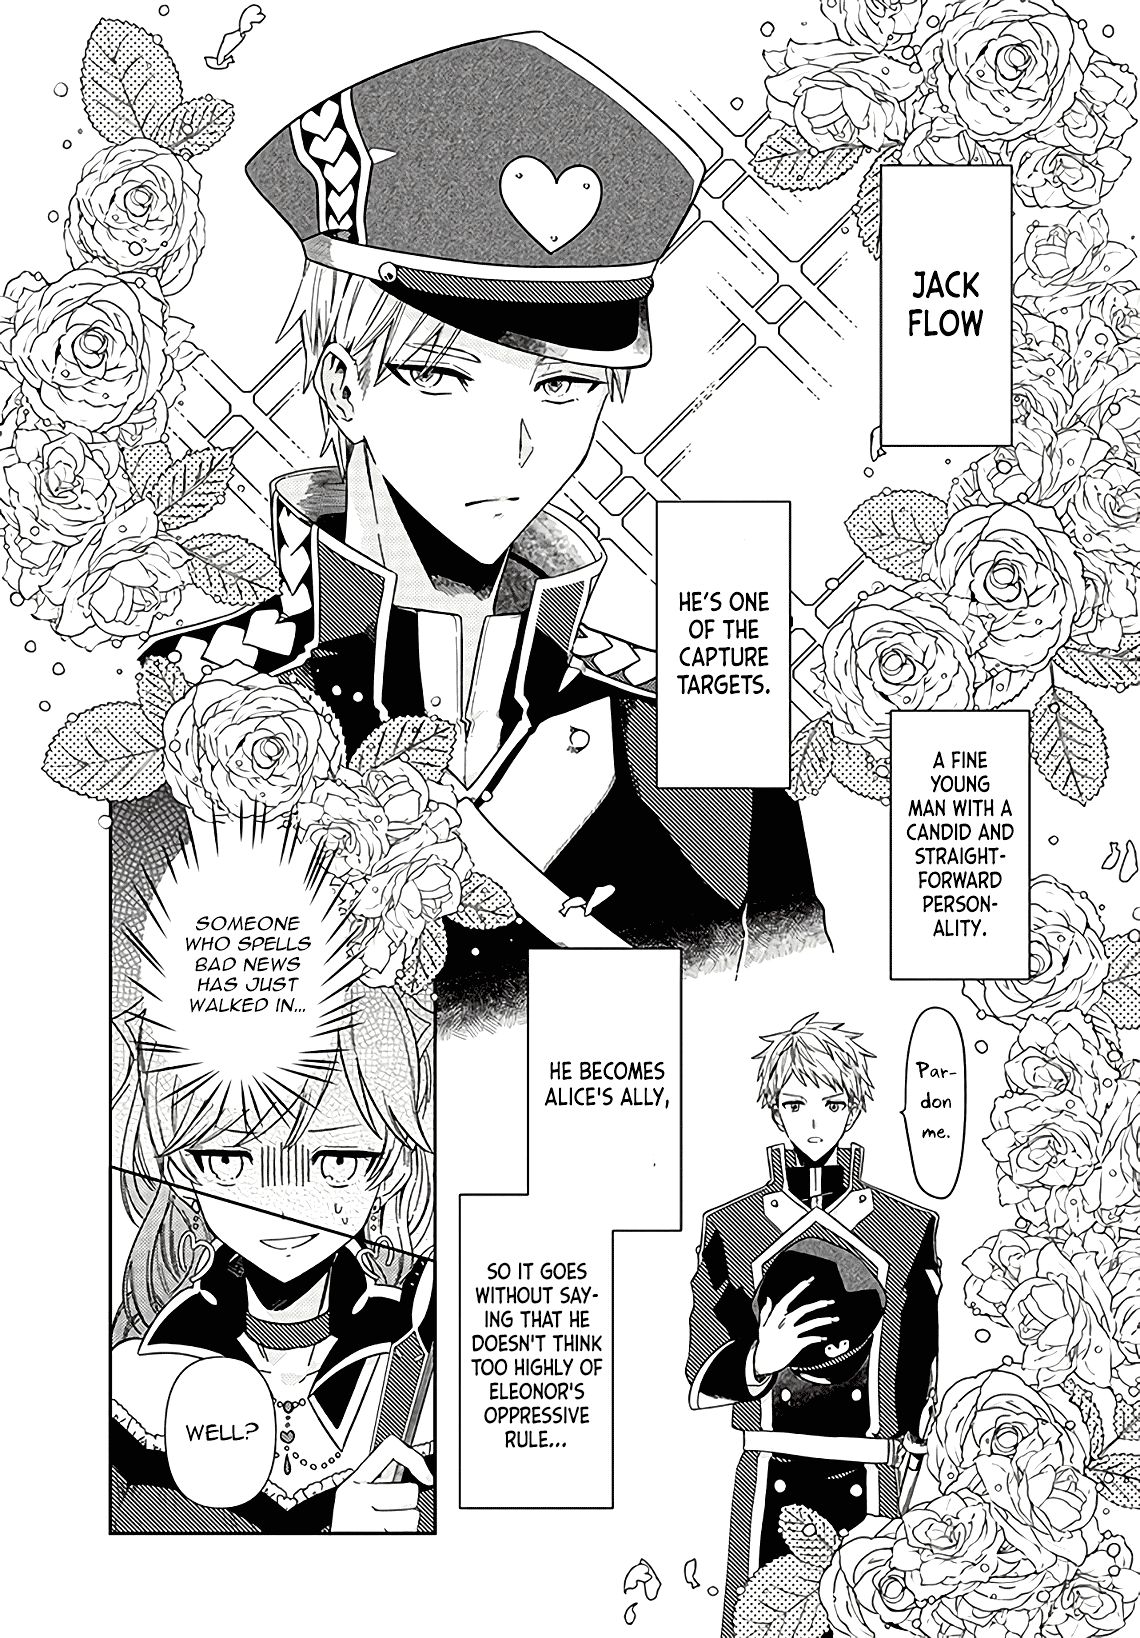 Read Queen of Hearts in Wonderland Manga English [New Chapters] Online